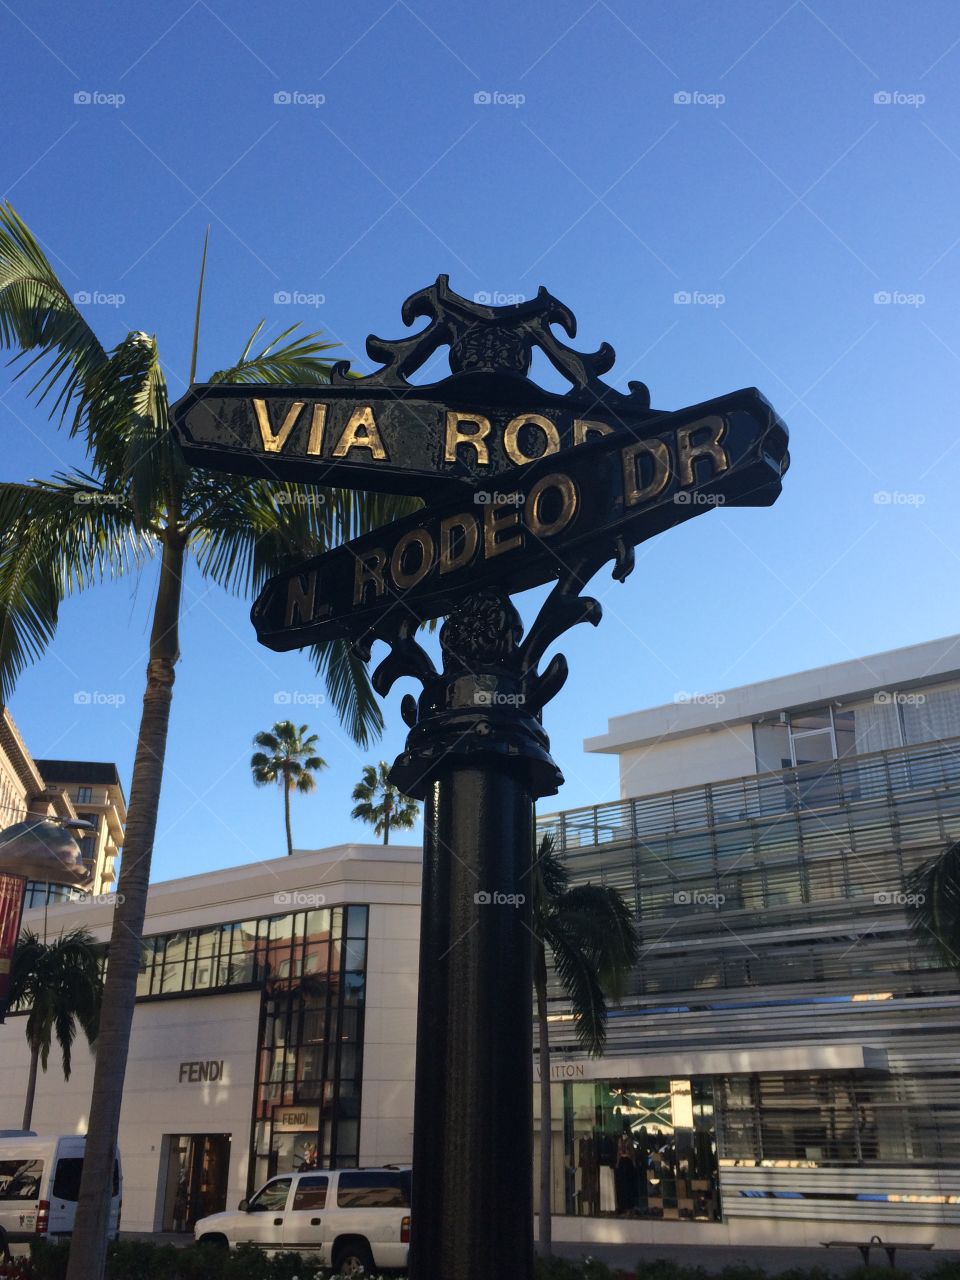 Rodeo Drive Street Signs